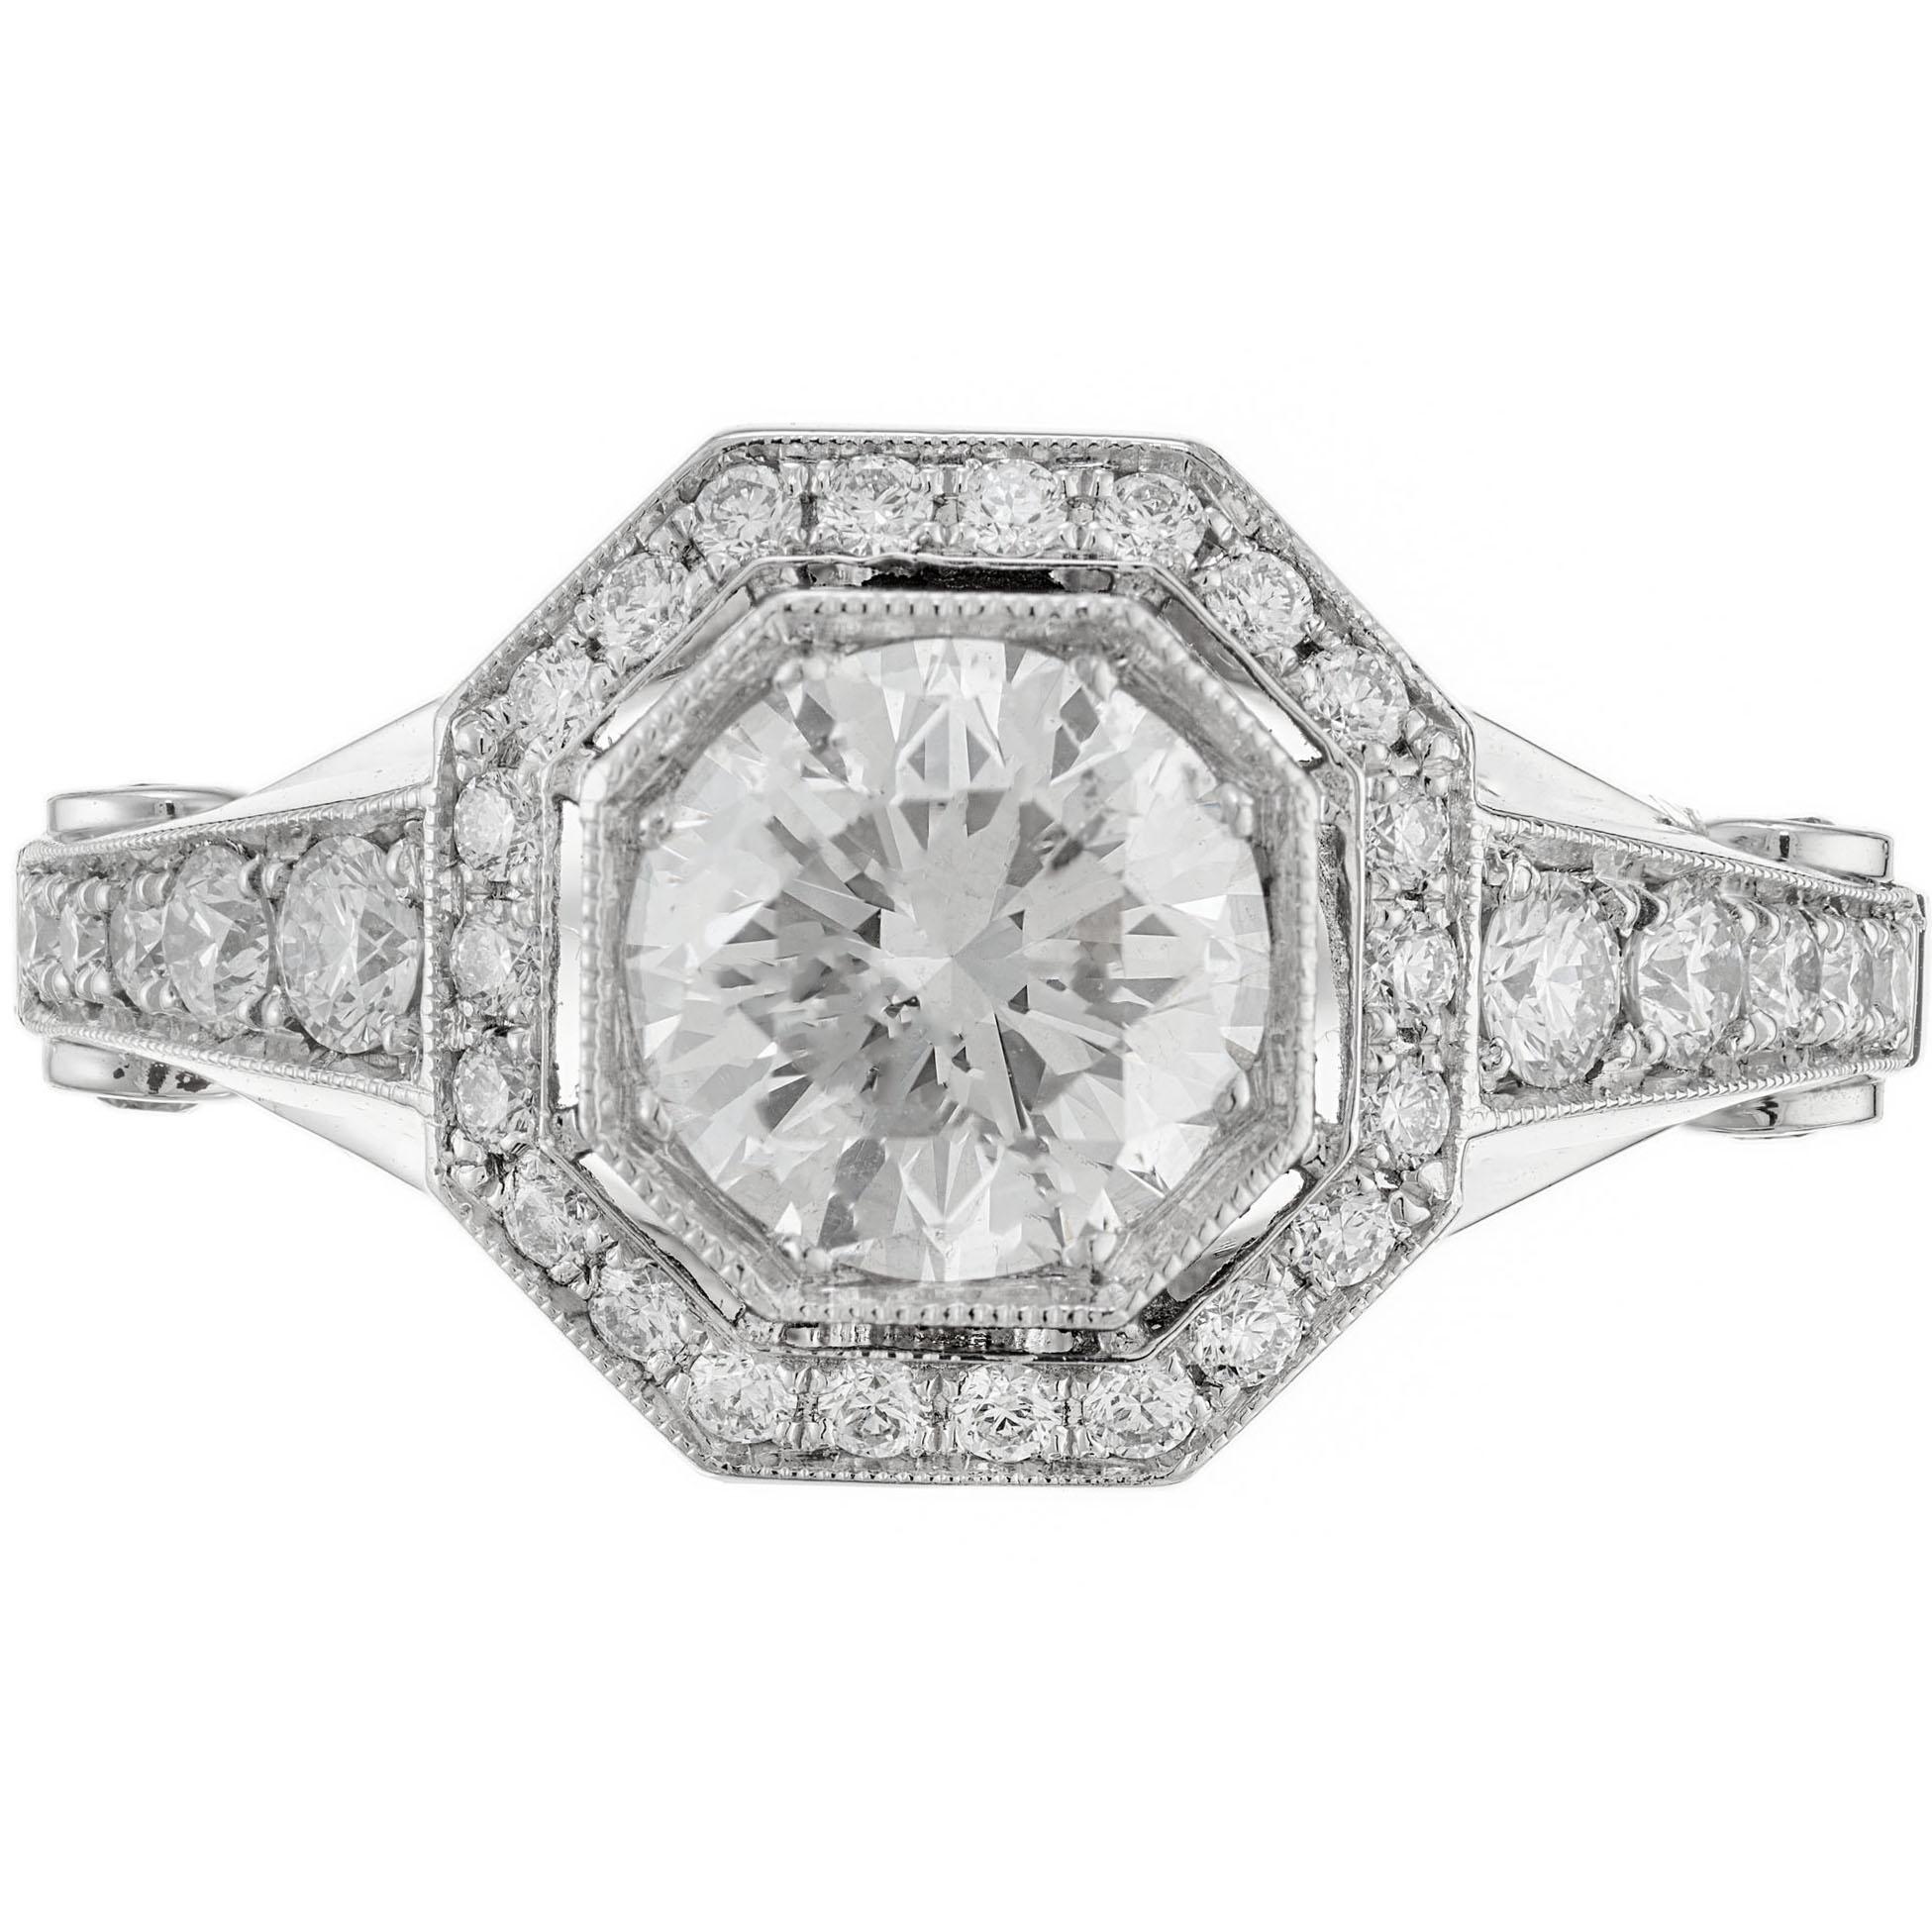 Diamond engagement ring. 1.23ct Round ideal cut center stone with octagonal shaped diamond halo in a platinum setting with round accent diamonds along both sides of the shoulders. EGL certified. Created in the Peter Suchy Workshop.

1 Ideal  Round